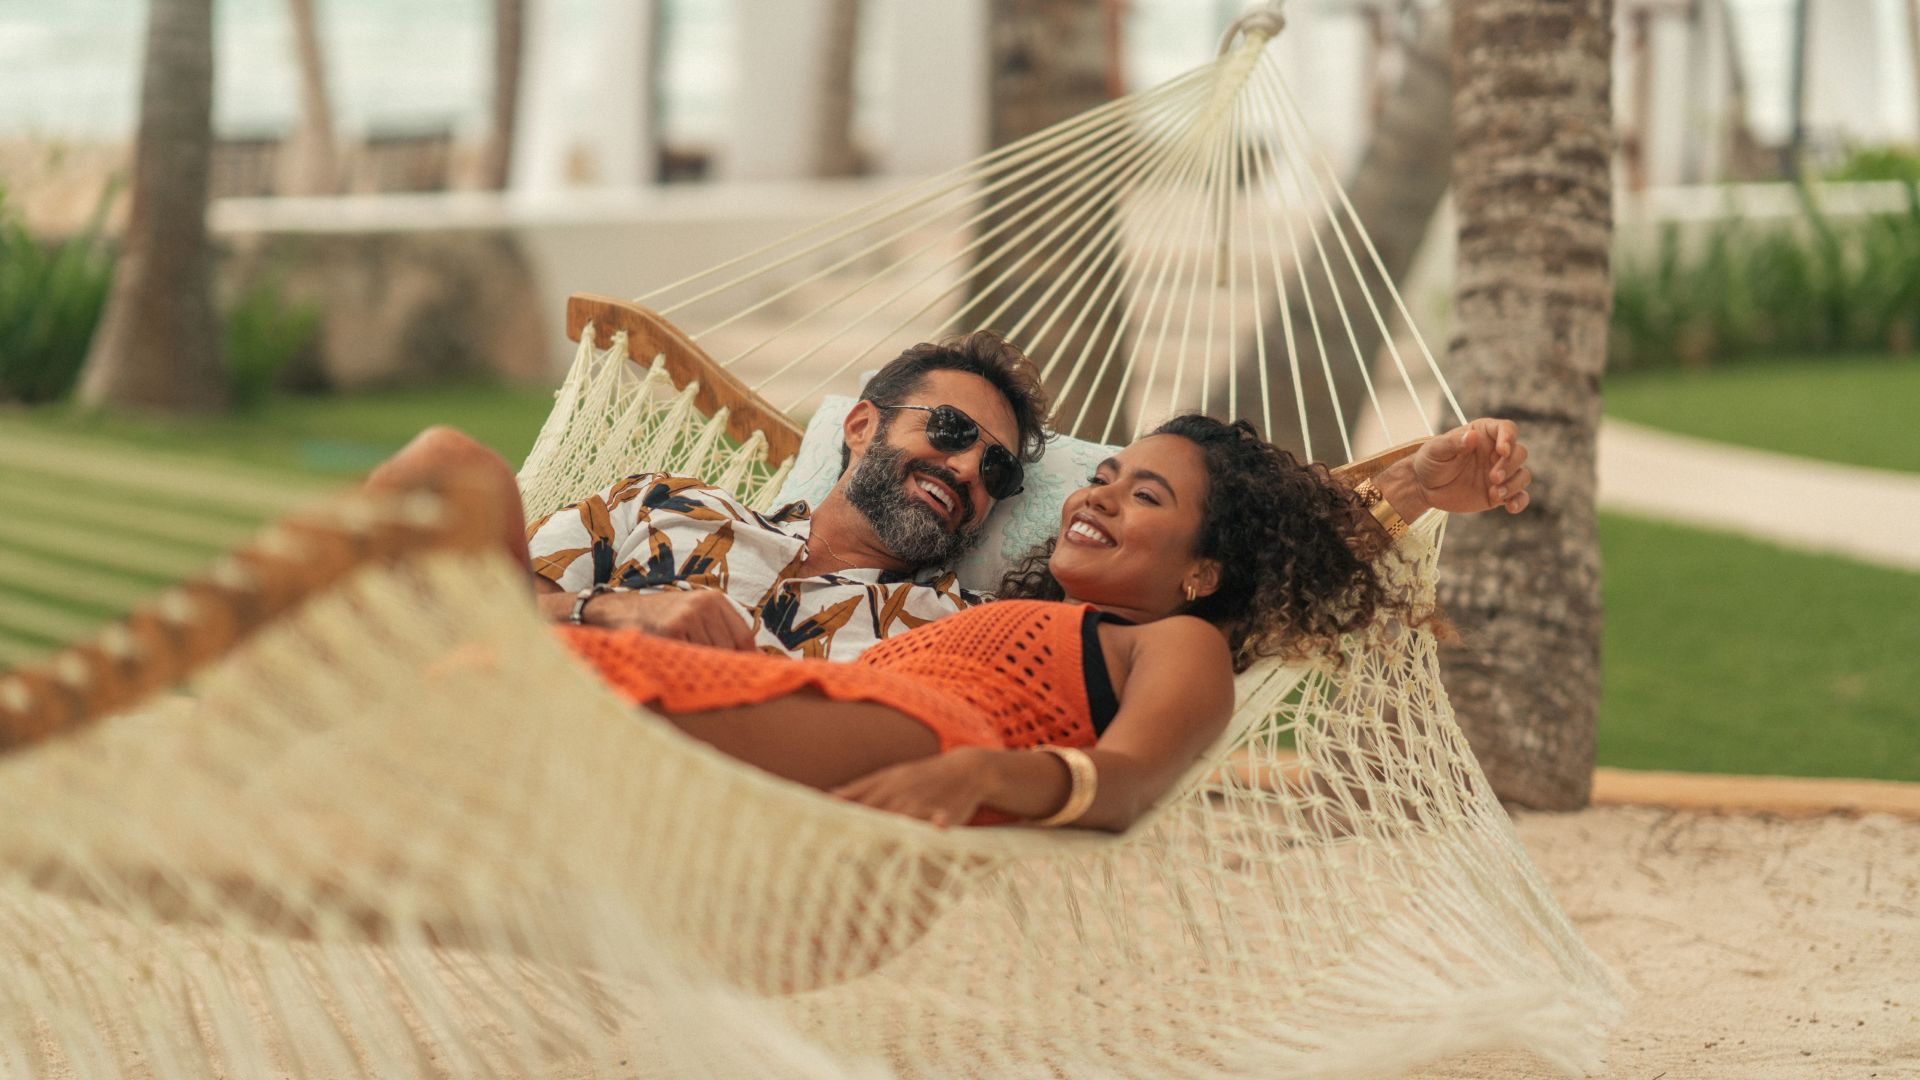 A Man And Woman Lying In A Hammock